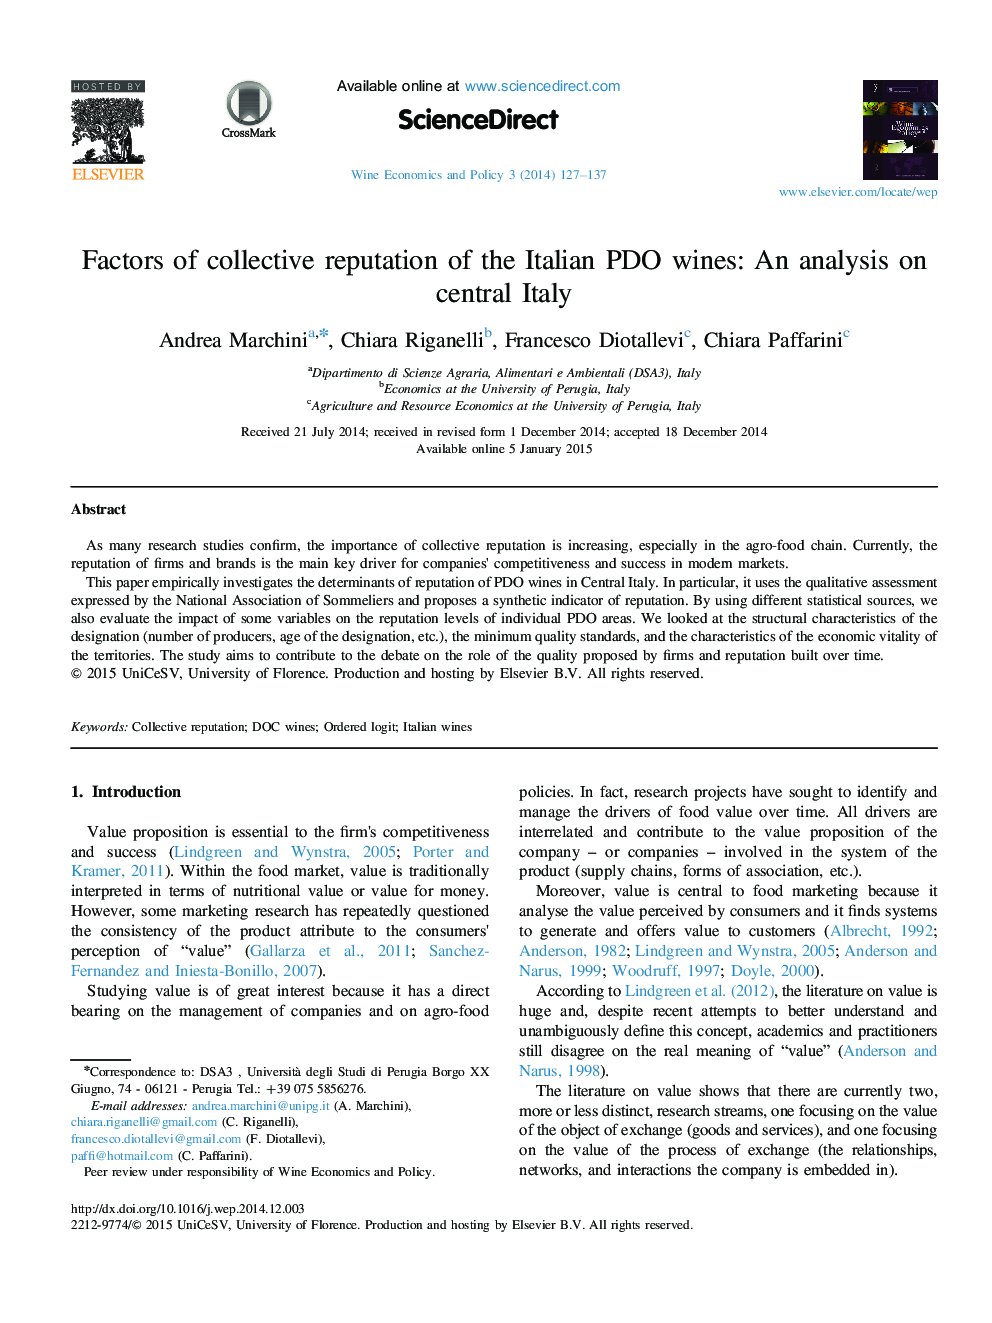 Factors of collective reputation of the Italian PDO wines: An analysis on central Italy 